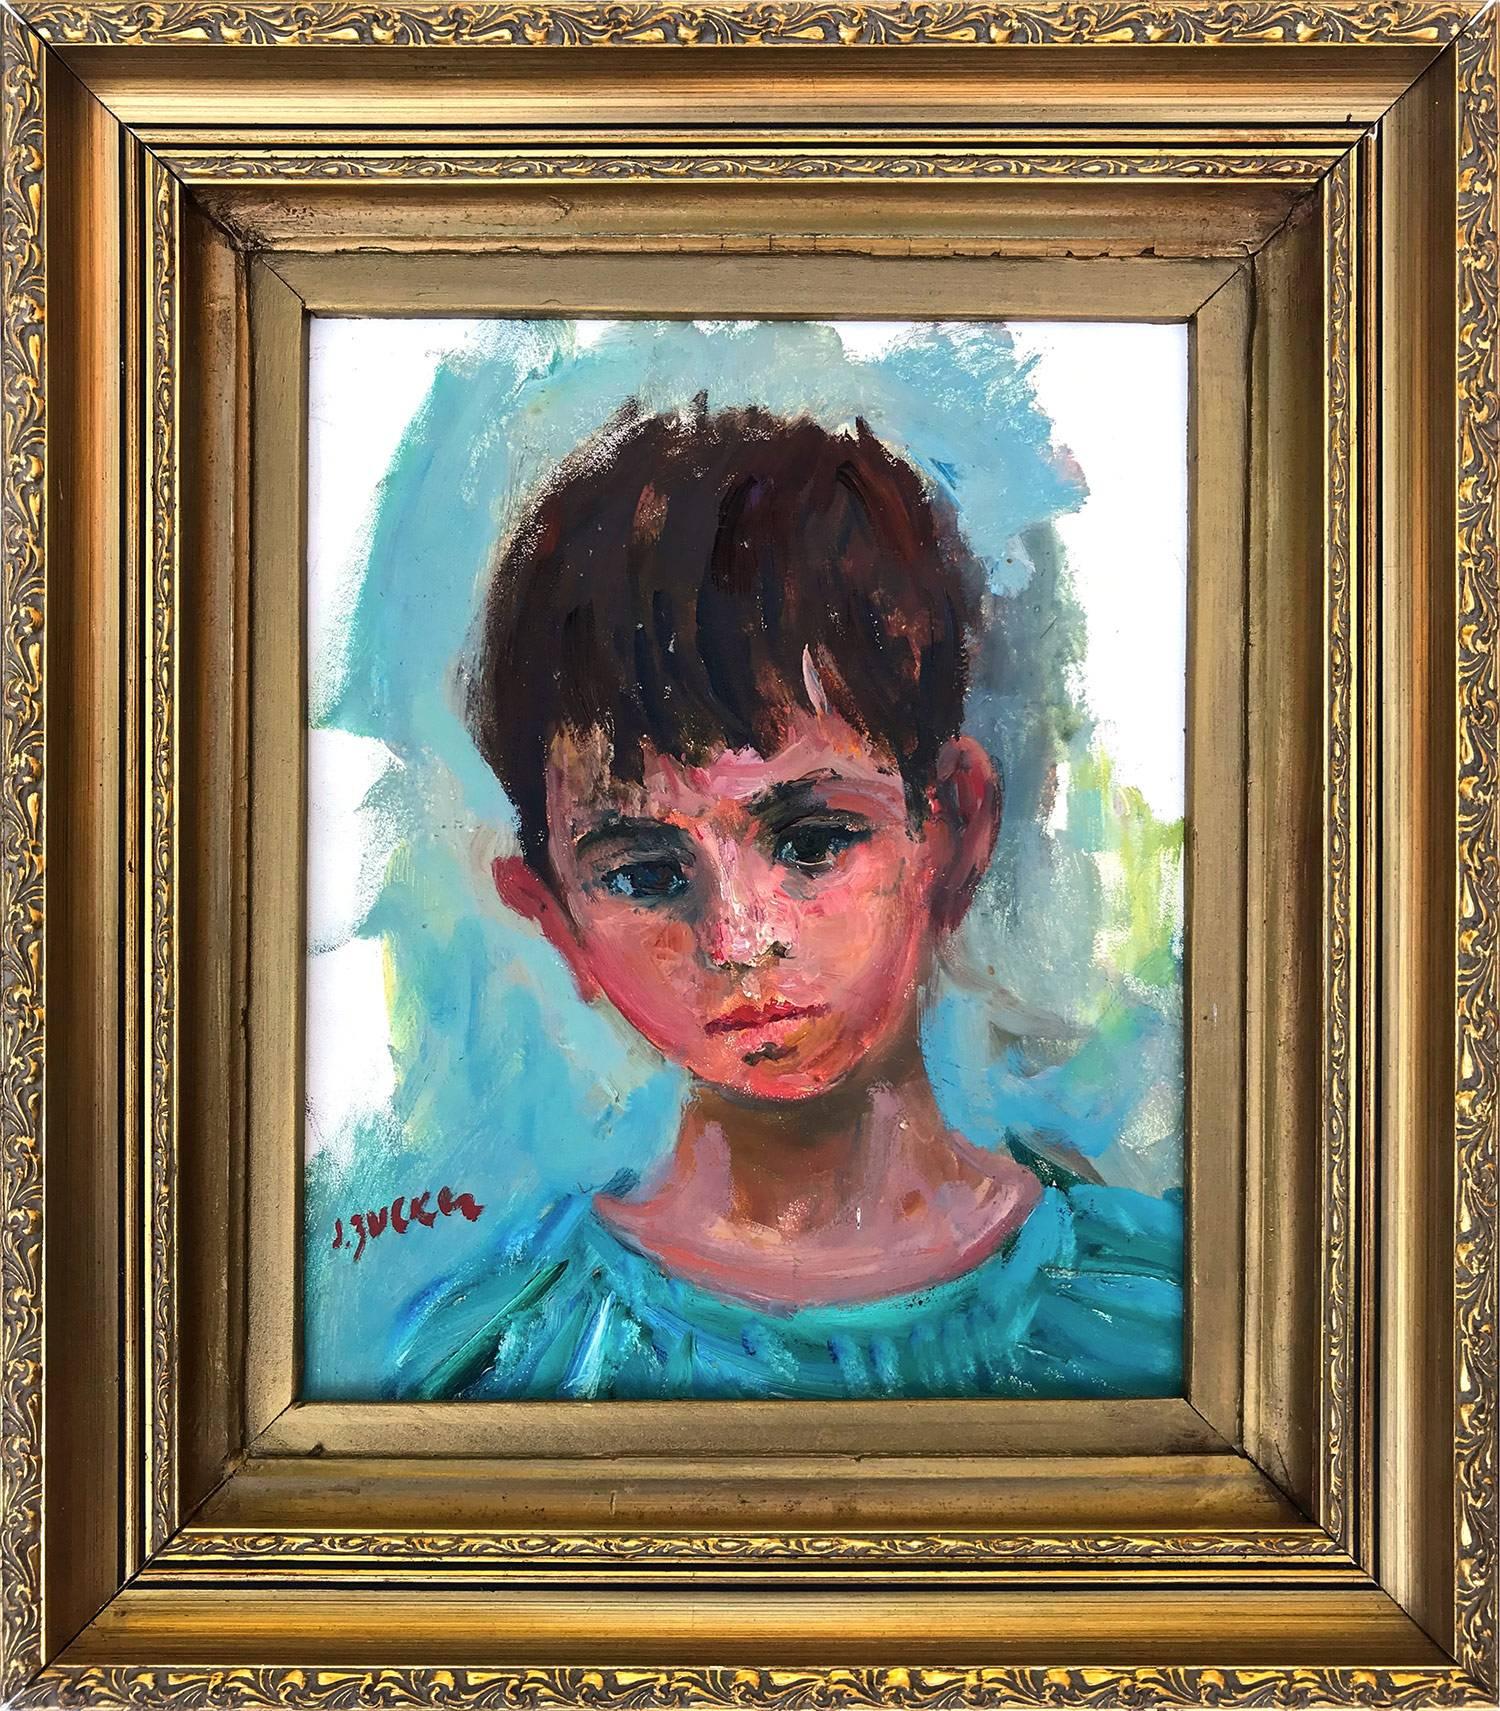 Jacques Zucker Portrait Painting - Portrait of a Young Boy in Blue